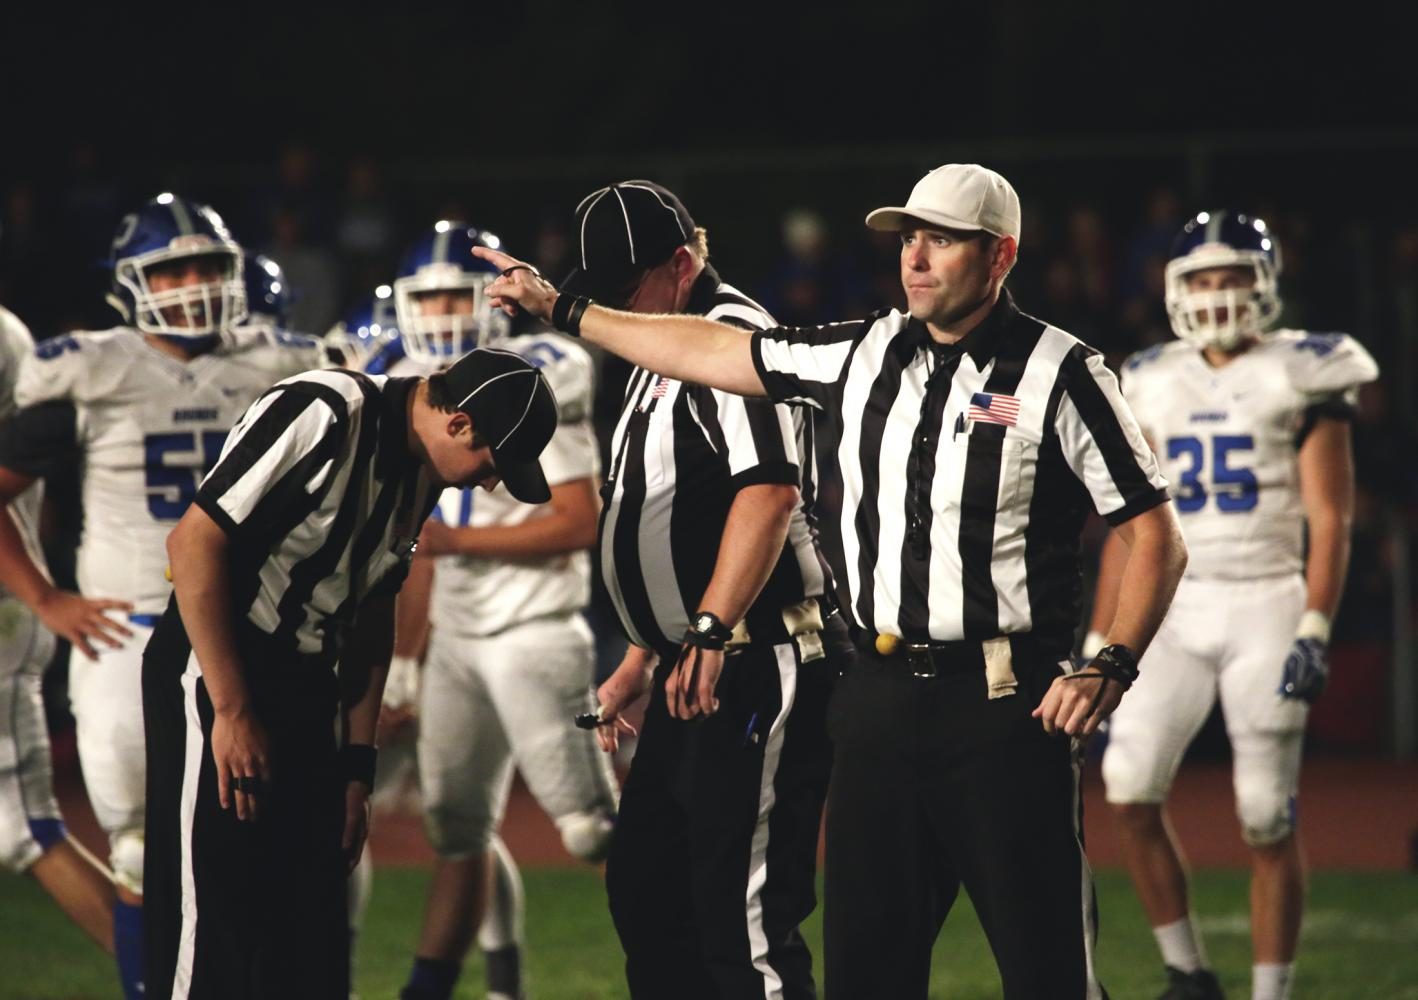 Referees come together for a flag in a game between the Pullman Greyhounds and Moscow Bears at Moscow High School on Friday.